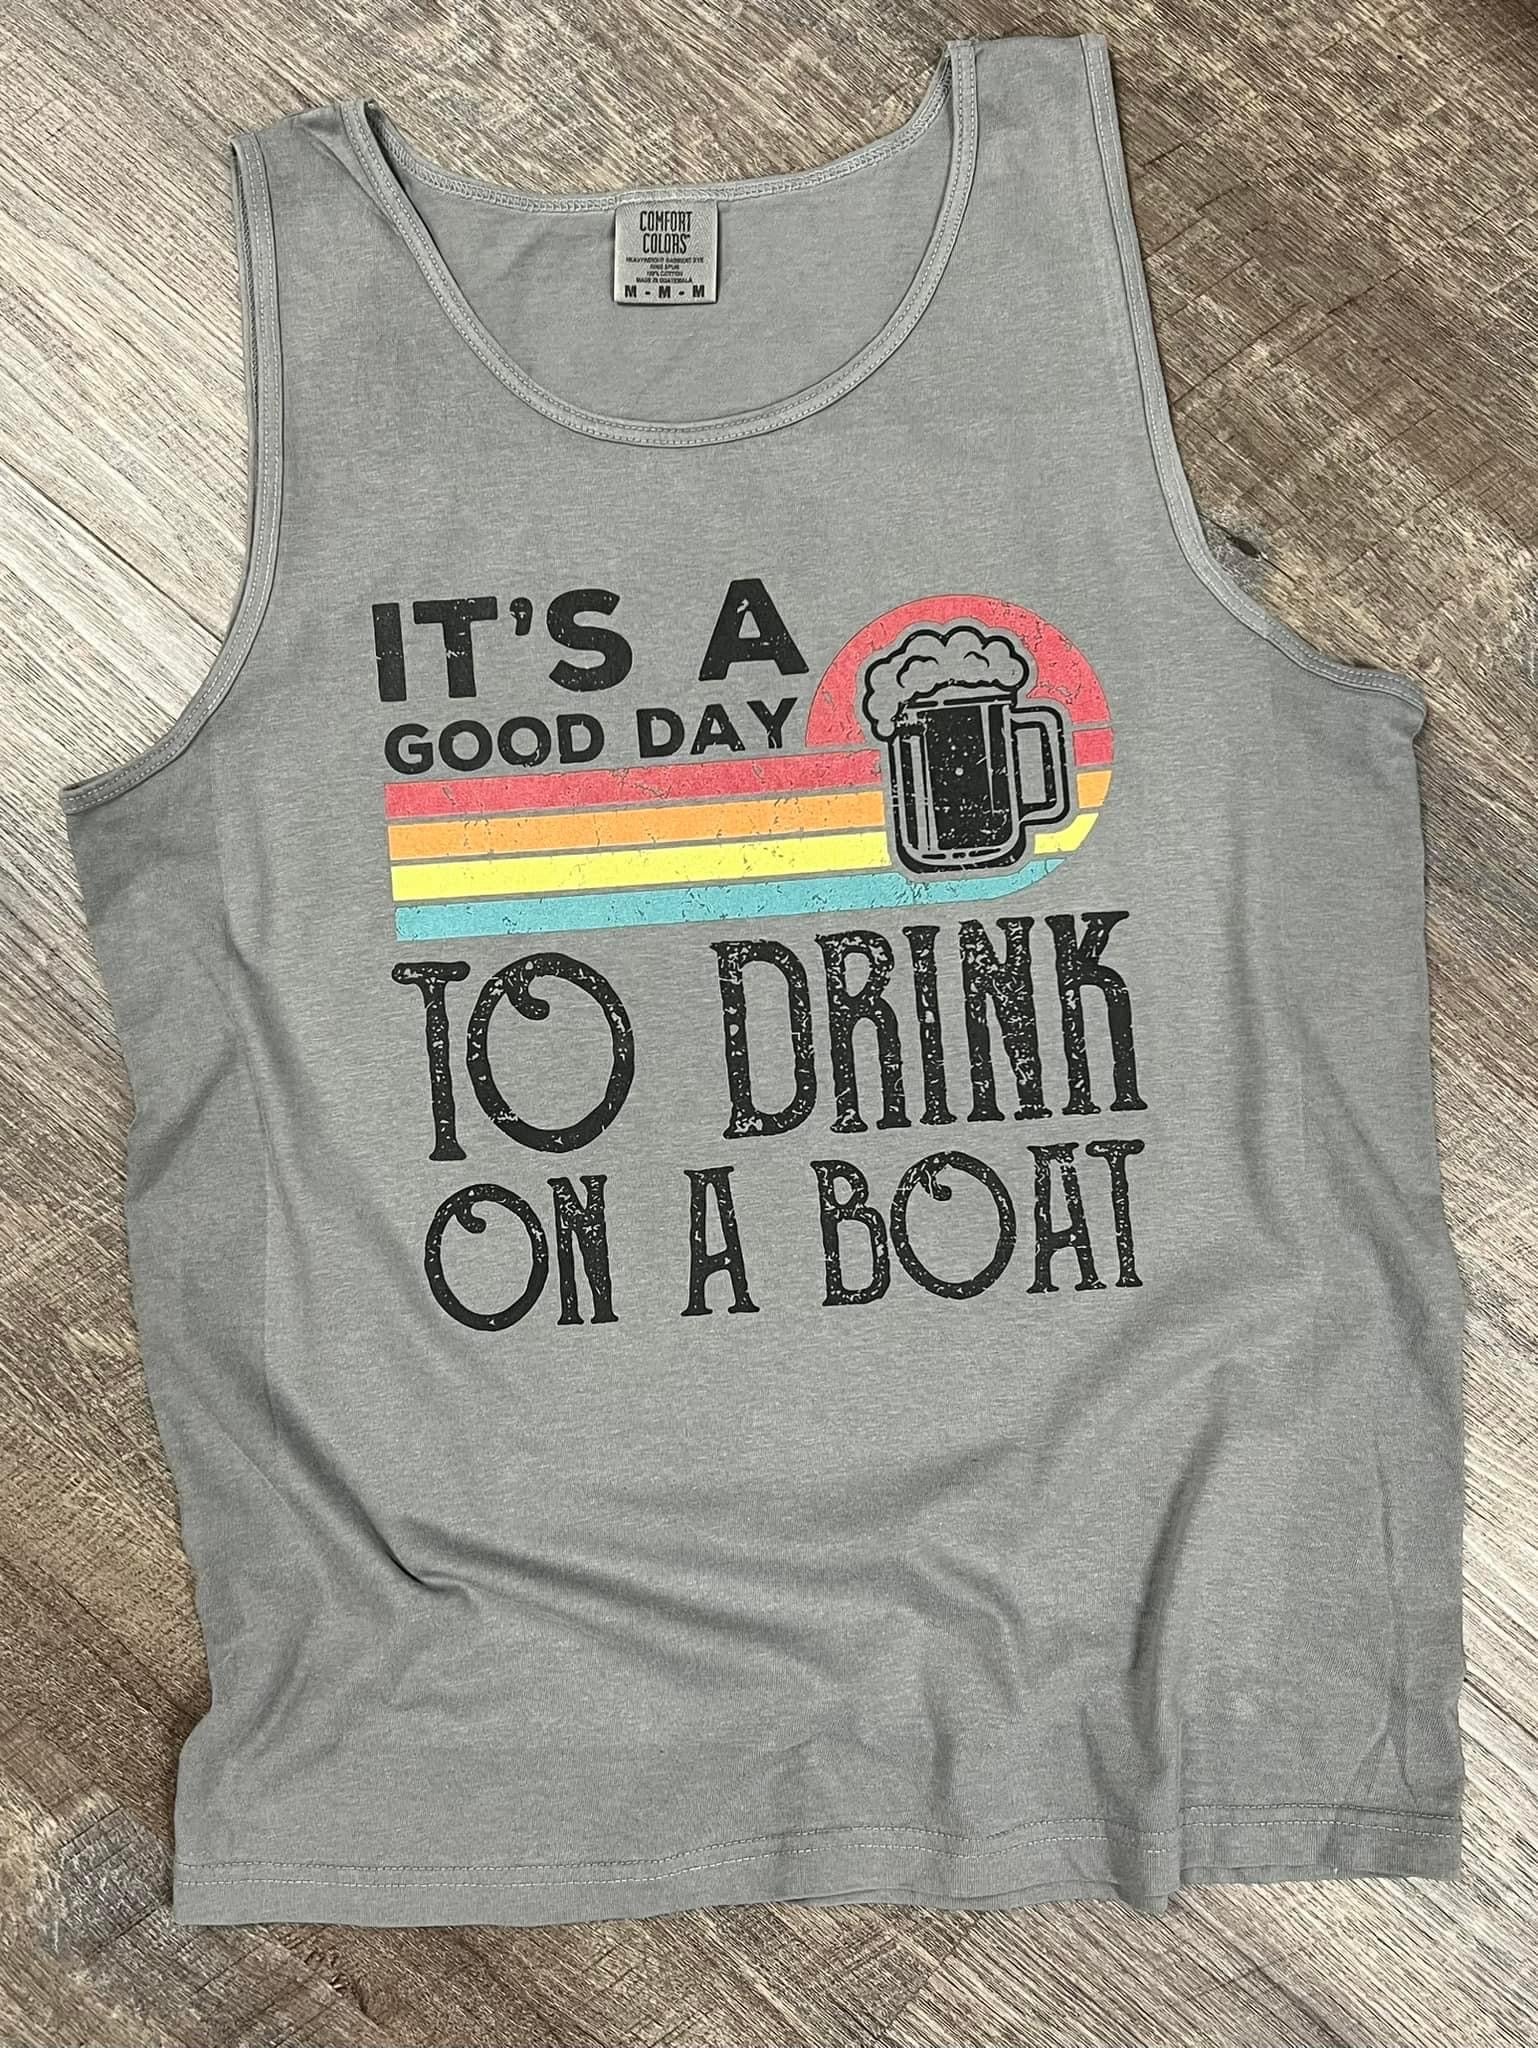 It's a Good Day to Drink on a Boat